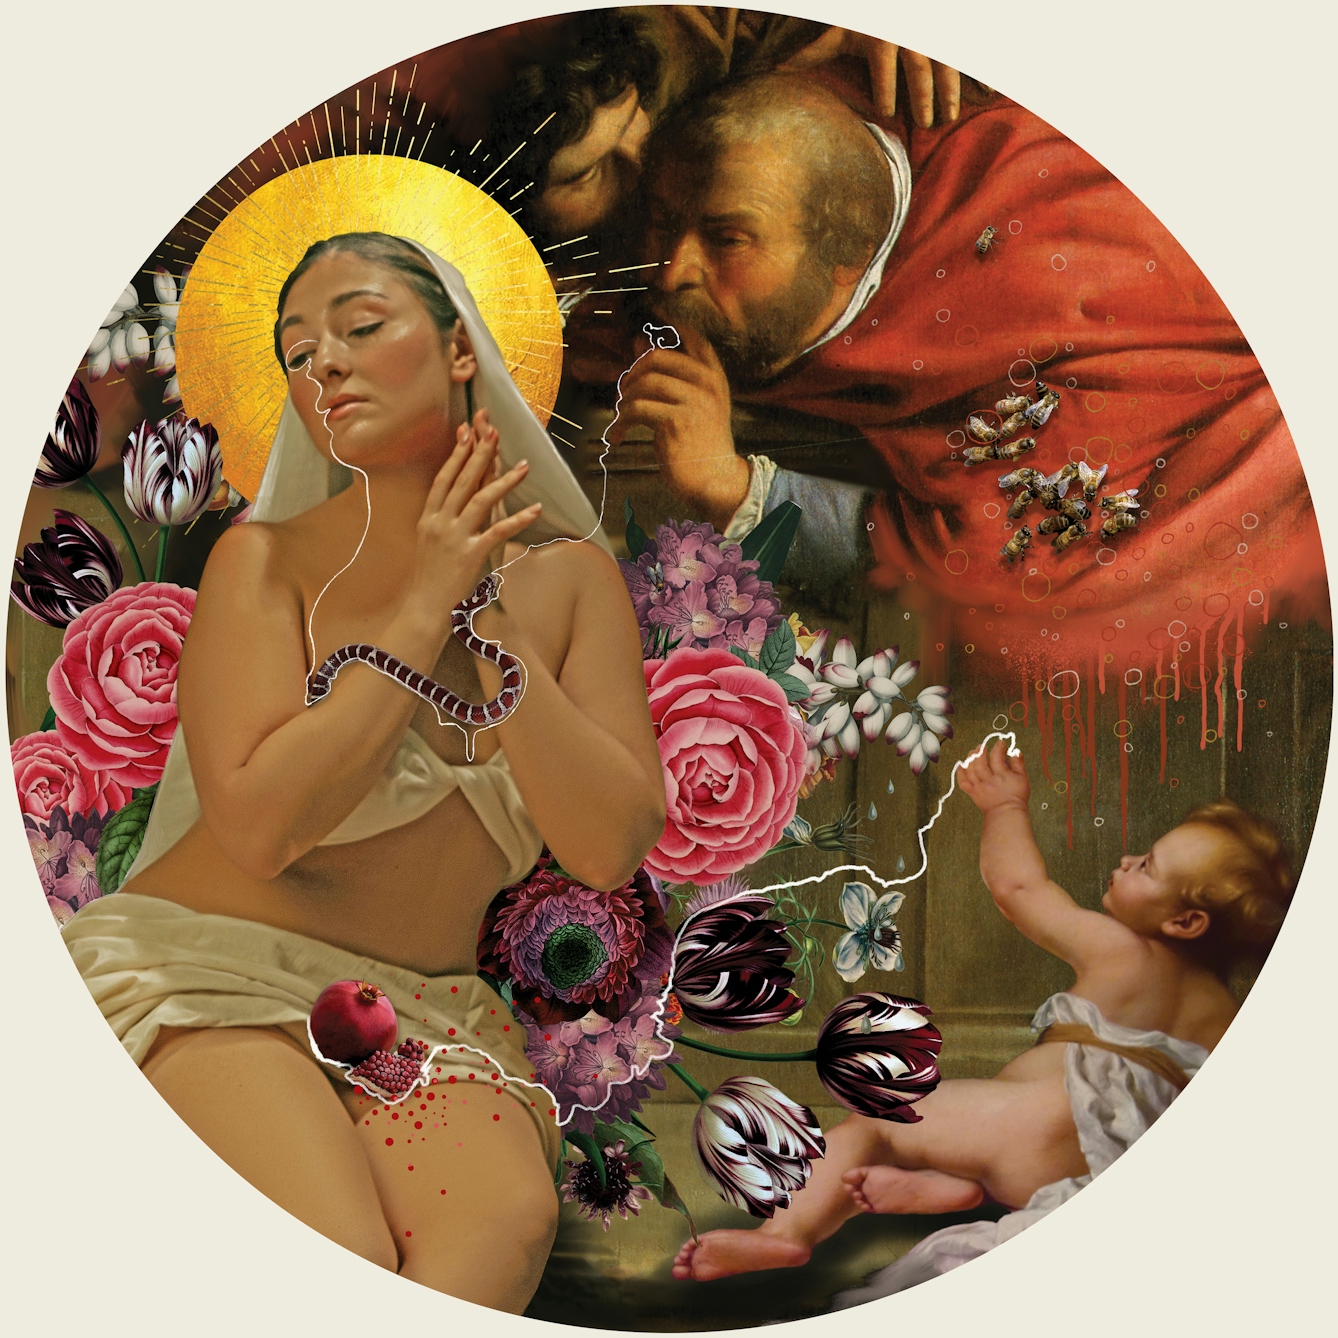 Digital montage artwork using elements from  the work of 16th century female baroque painter Artemisia Gentileschi, combined with other imagery and illustrative elements. The artwork is set within a circle. The image shows a woman with a golden halo, partially naked, sitting with her hands clasped together across he chest, her head tilted to the left and her eyes closed. In her lap is a pomegranate and around her wrist is a small stripy snake. Behind her to the right are two bearded men huddled in conversation, one whispering in the other's ear, one looking at the woman with his hand raised to his lips. On his red robes is a cluster of bees. Behind the woman are various colourful flowers in full bloom. To the bottom right is a young cherub-like child, partially clothed with their hand raised up, looking towards the two men. There is a thin white line which meanders and zig-zags across the image from the woman's right eye, down her body and over to the hand of one of the men. There is another line with link the pomegranate in the woman's lap to the young child's raised hand.